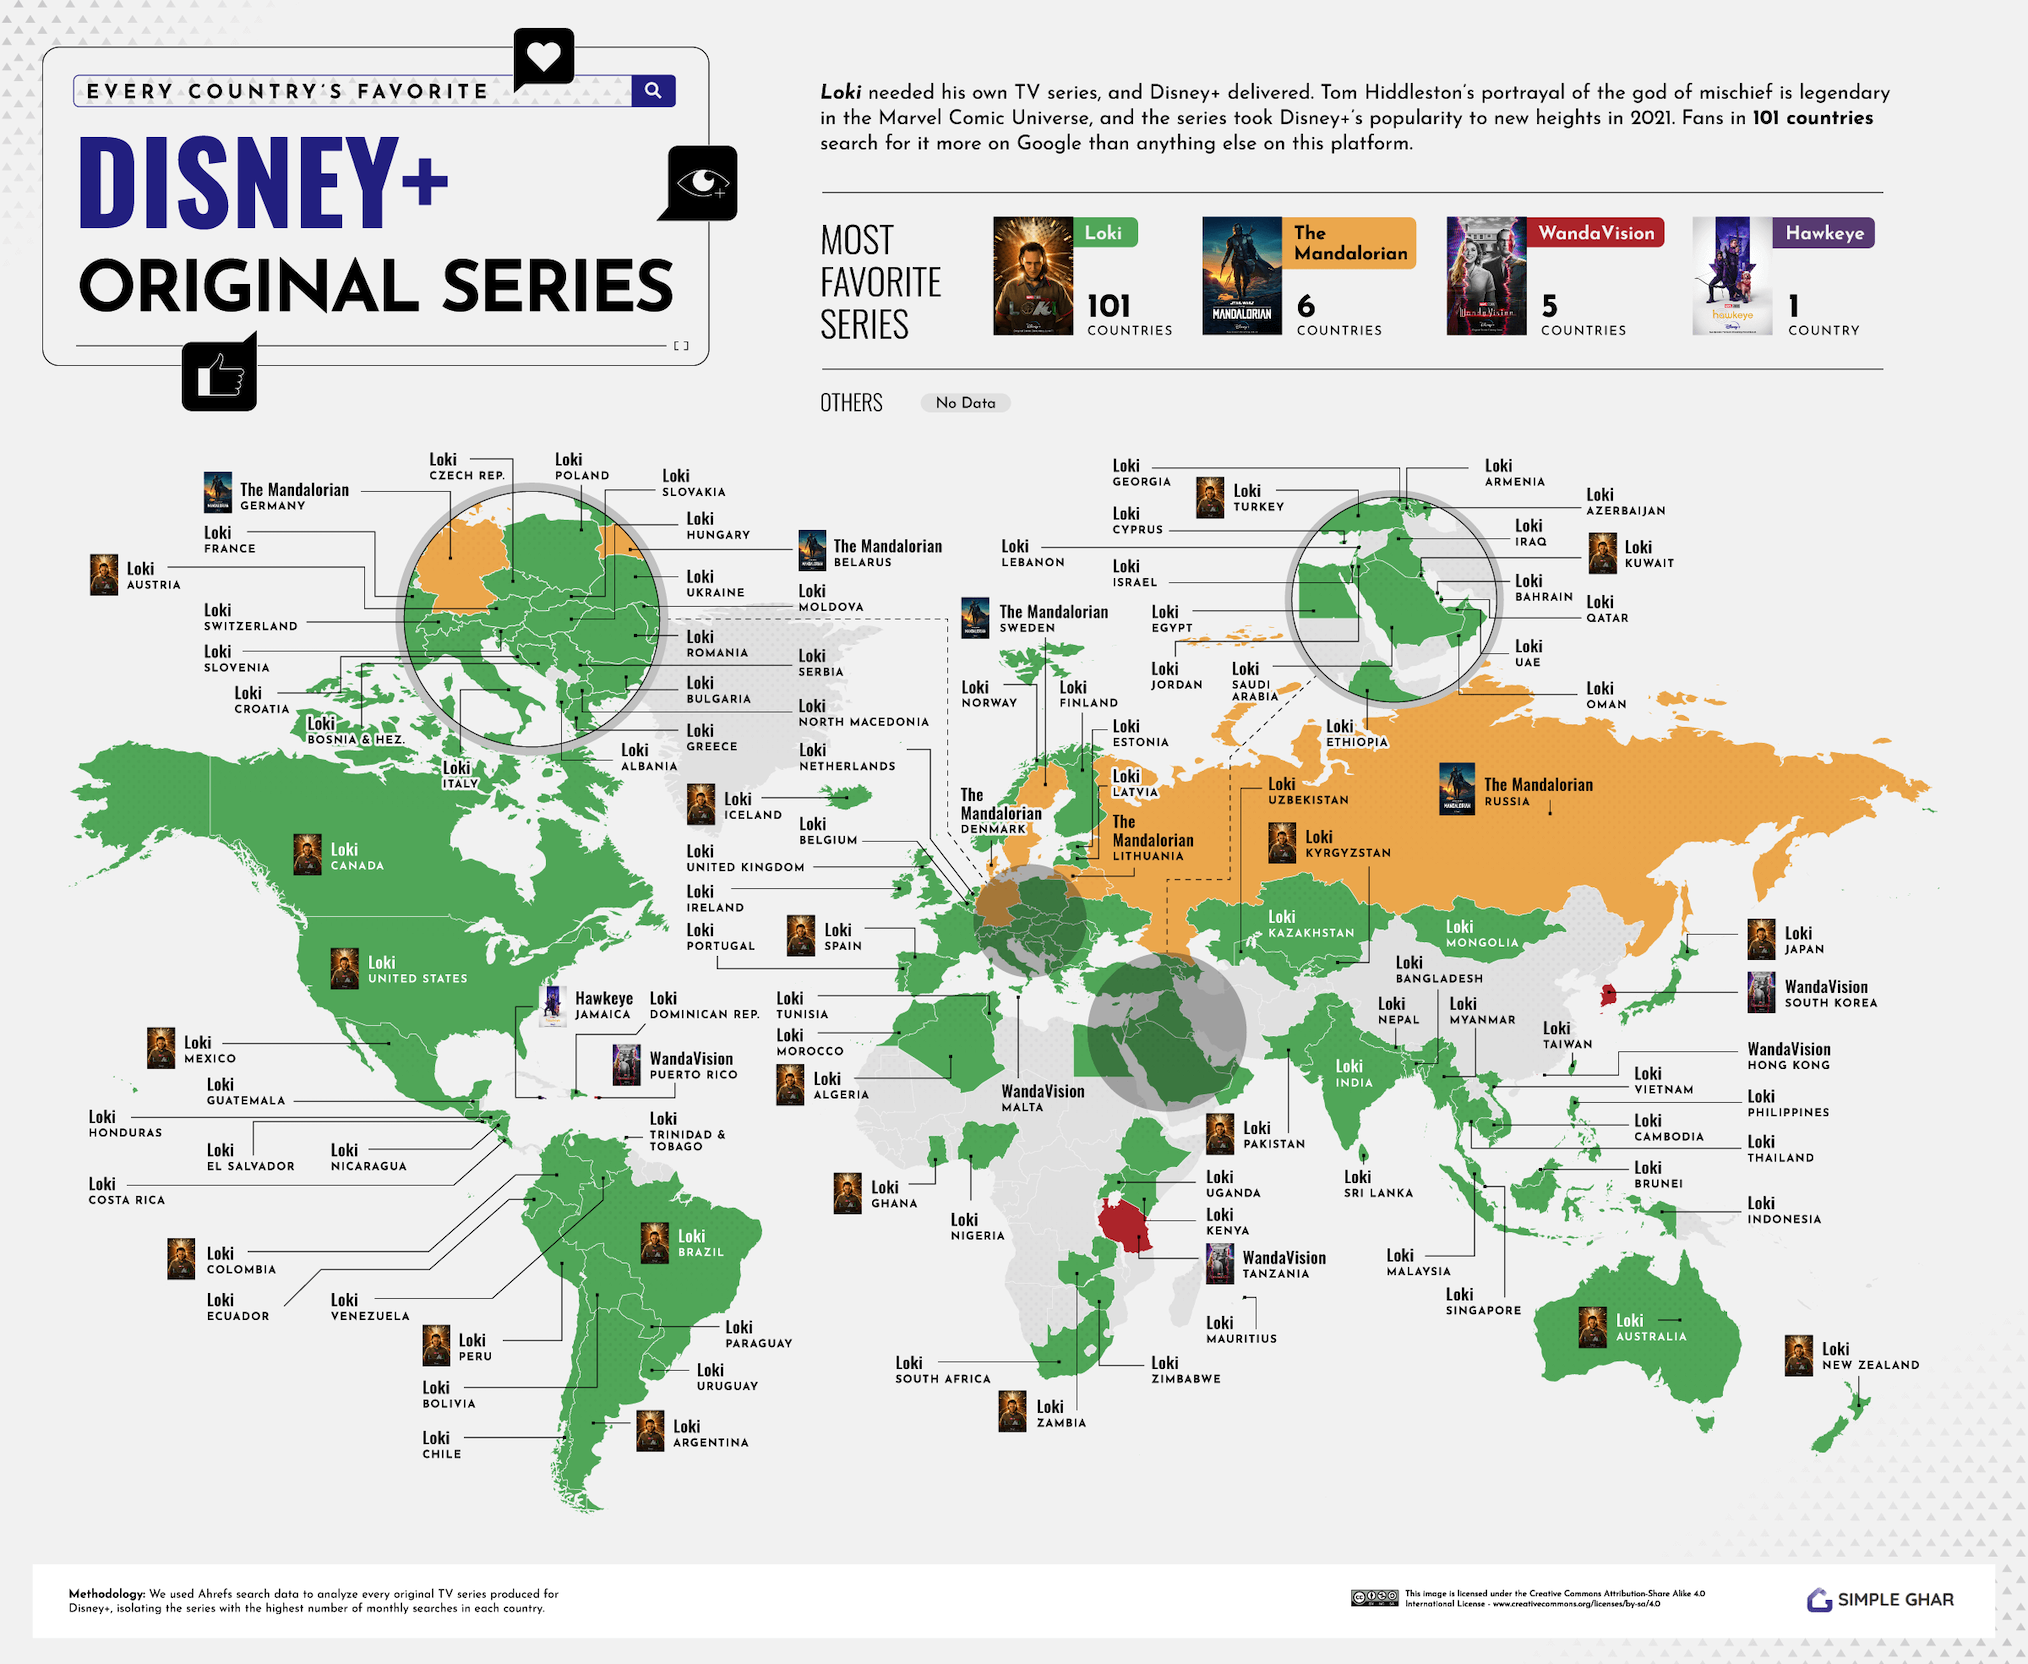 Every country's favorite Disney+ series